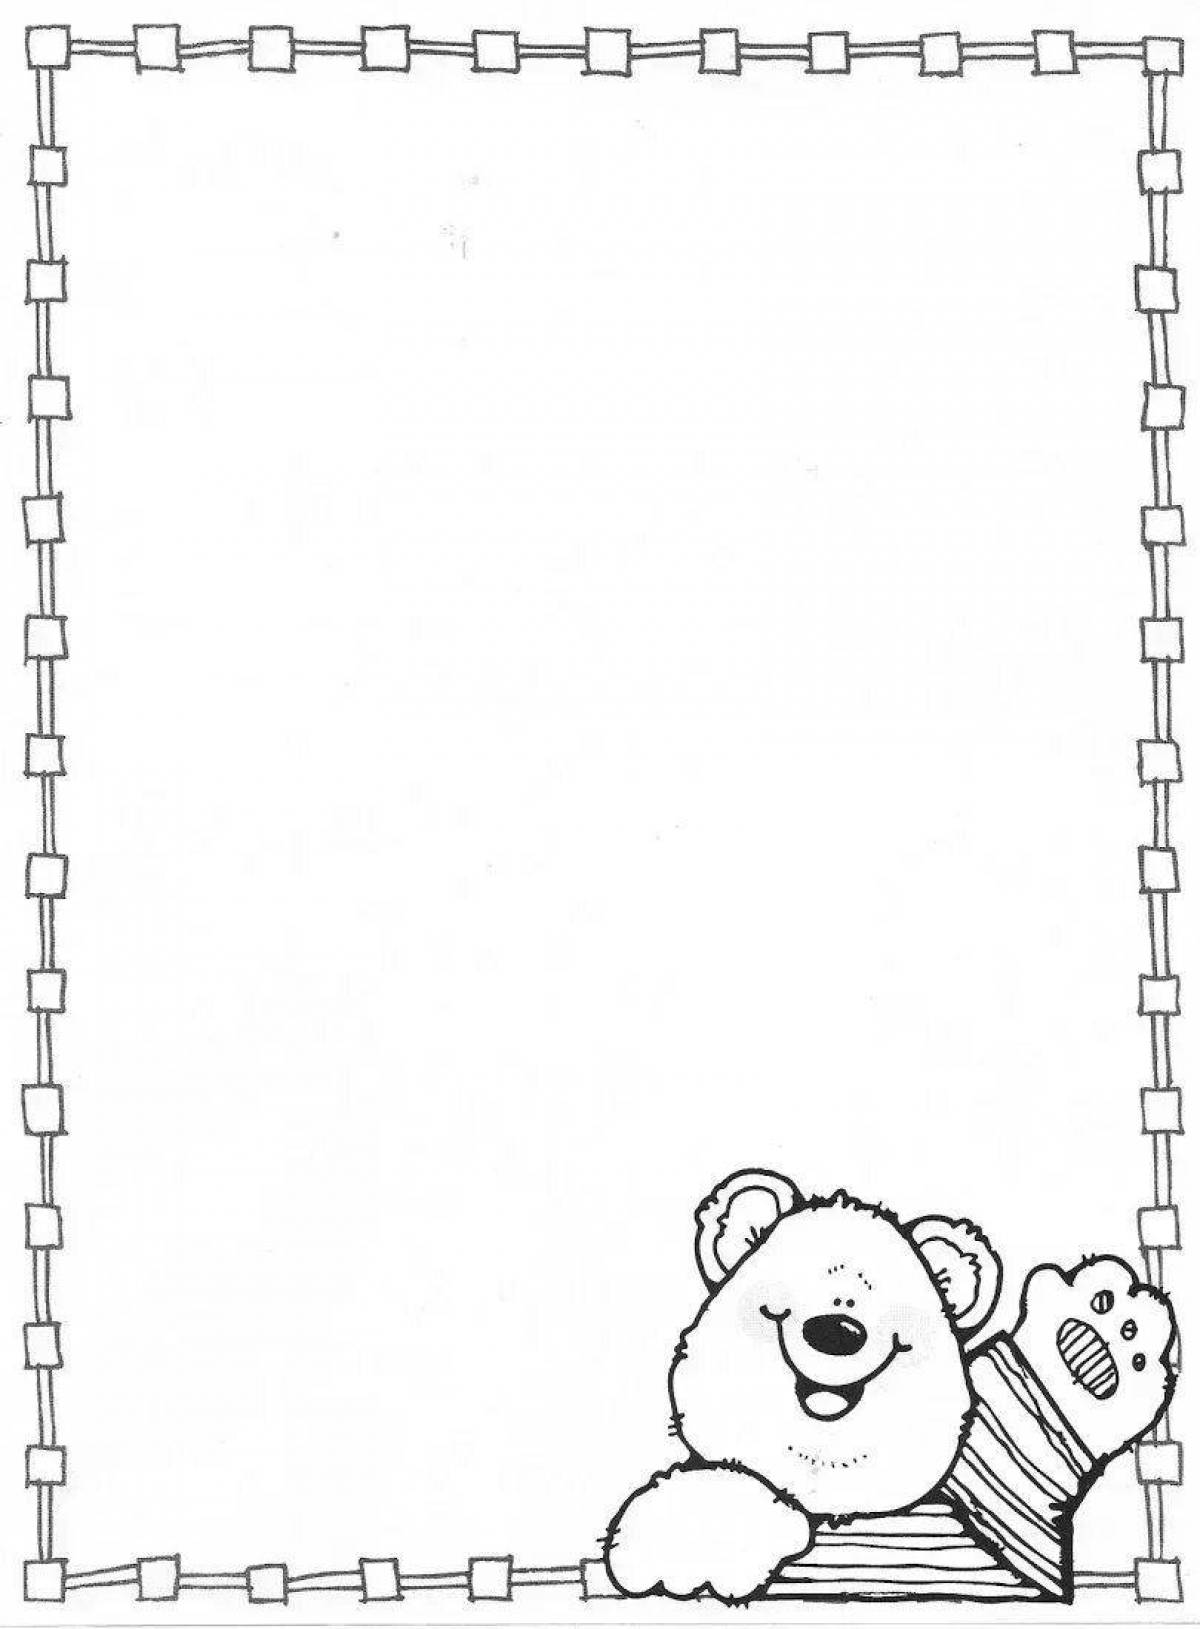 Coloring frame for toddlers